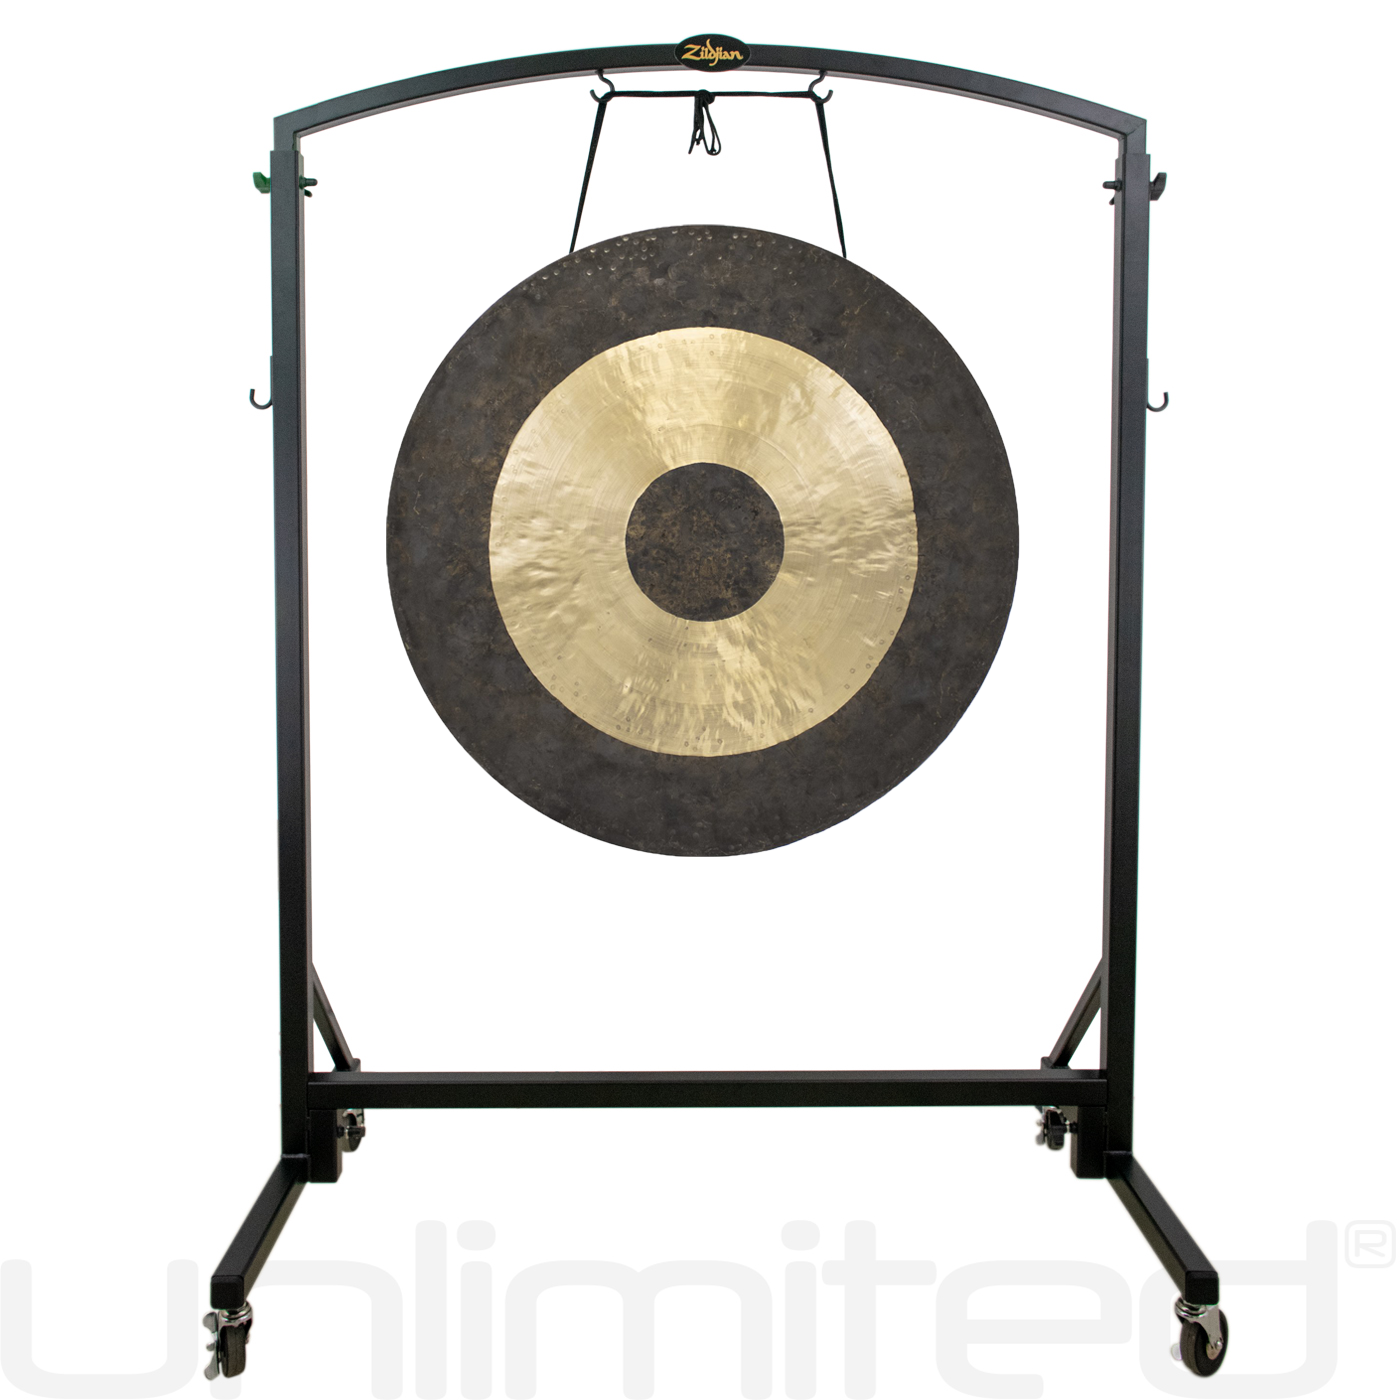 55cm Ceremonial Gong - Smile